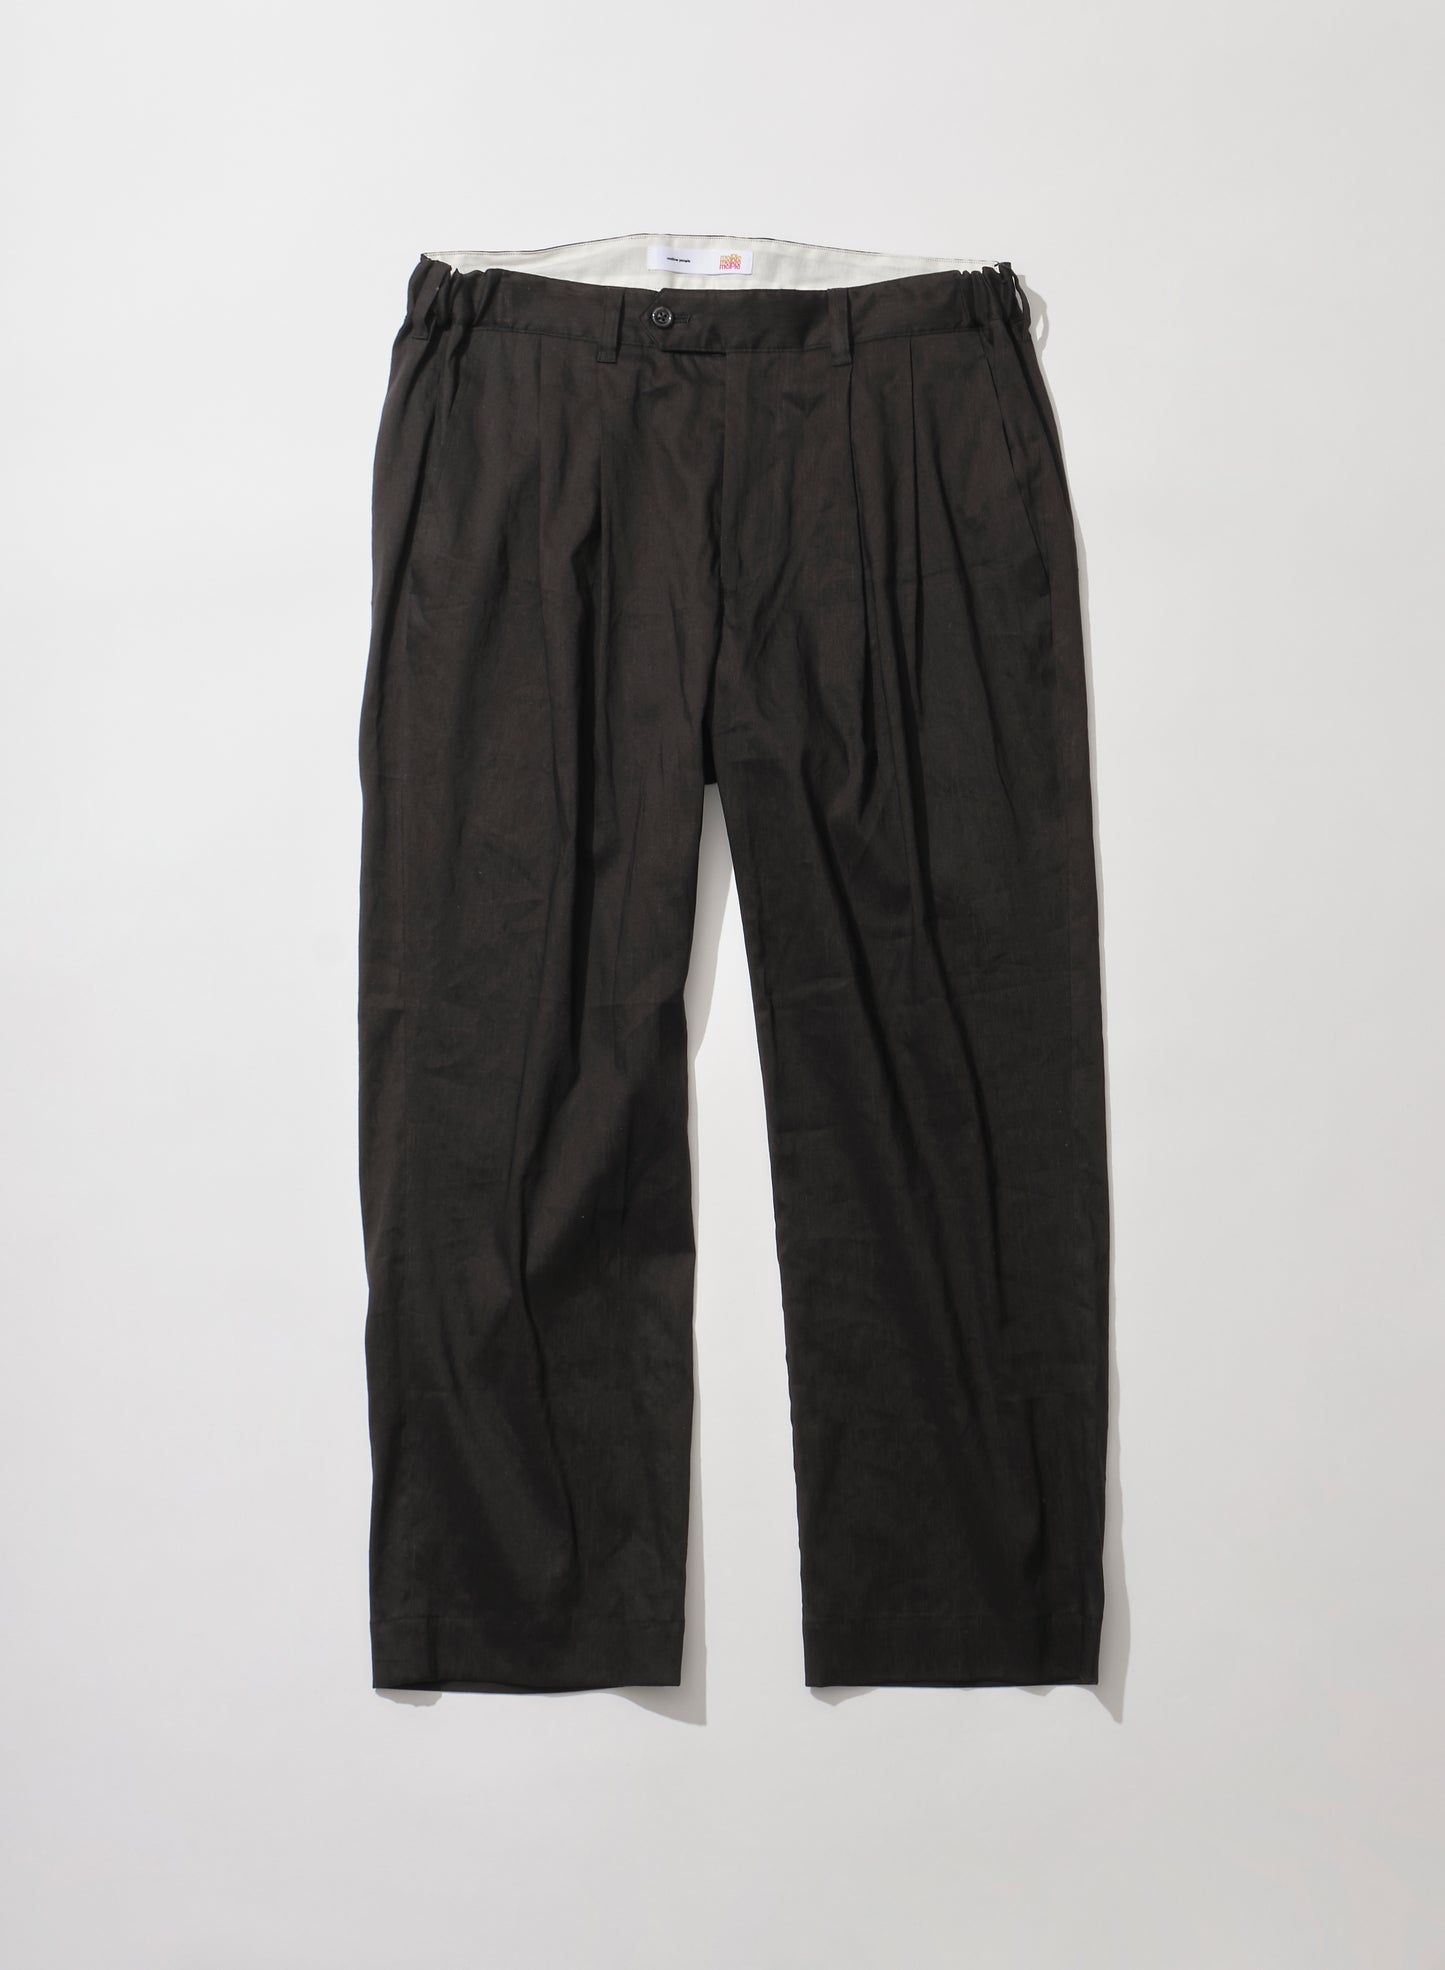 Tomcat Vacation Wide Trousers-Linen